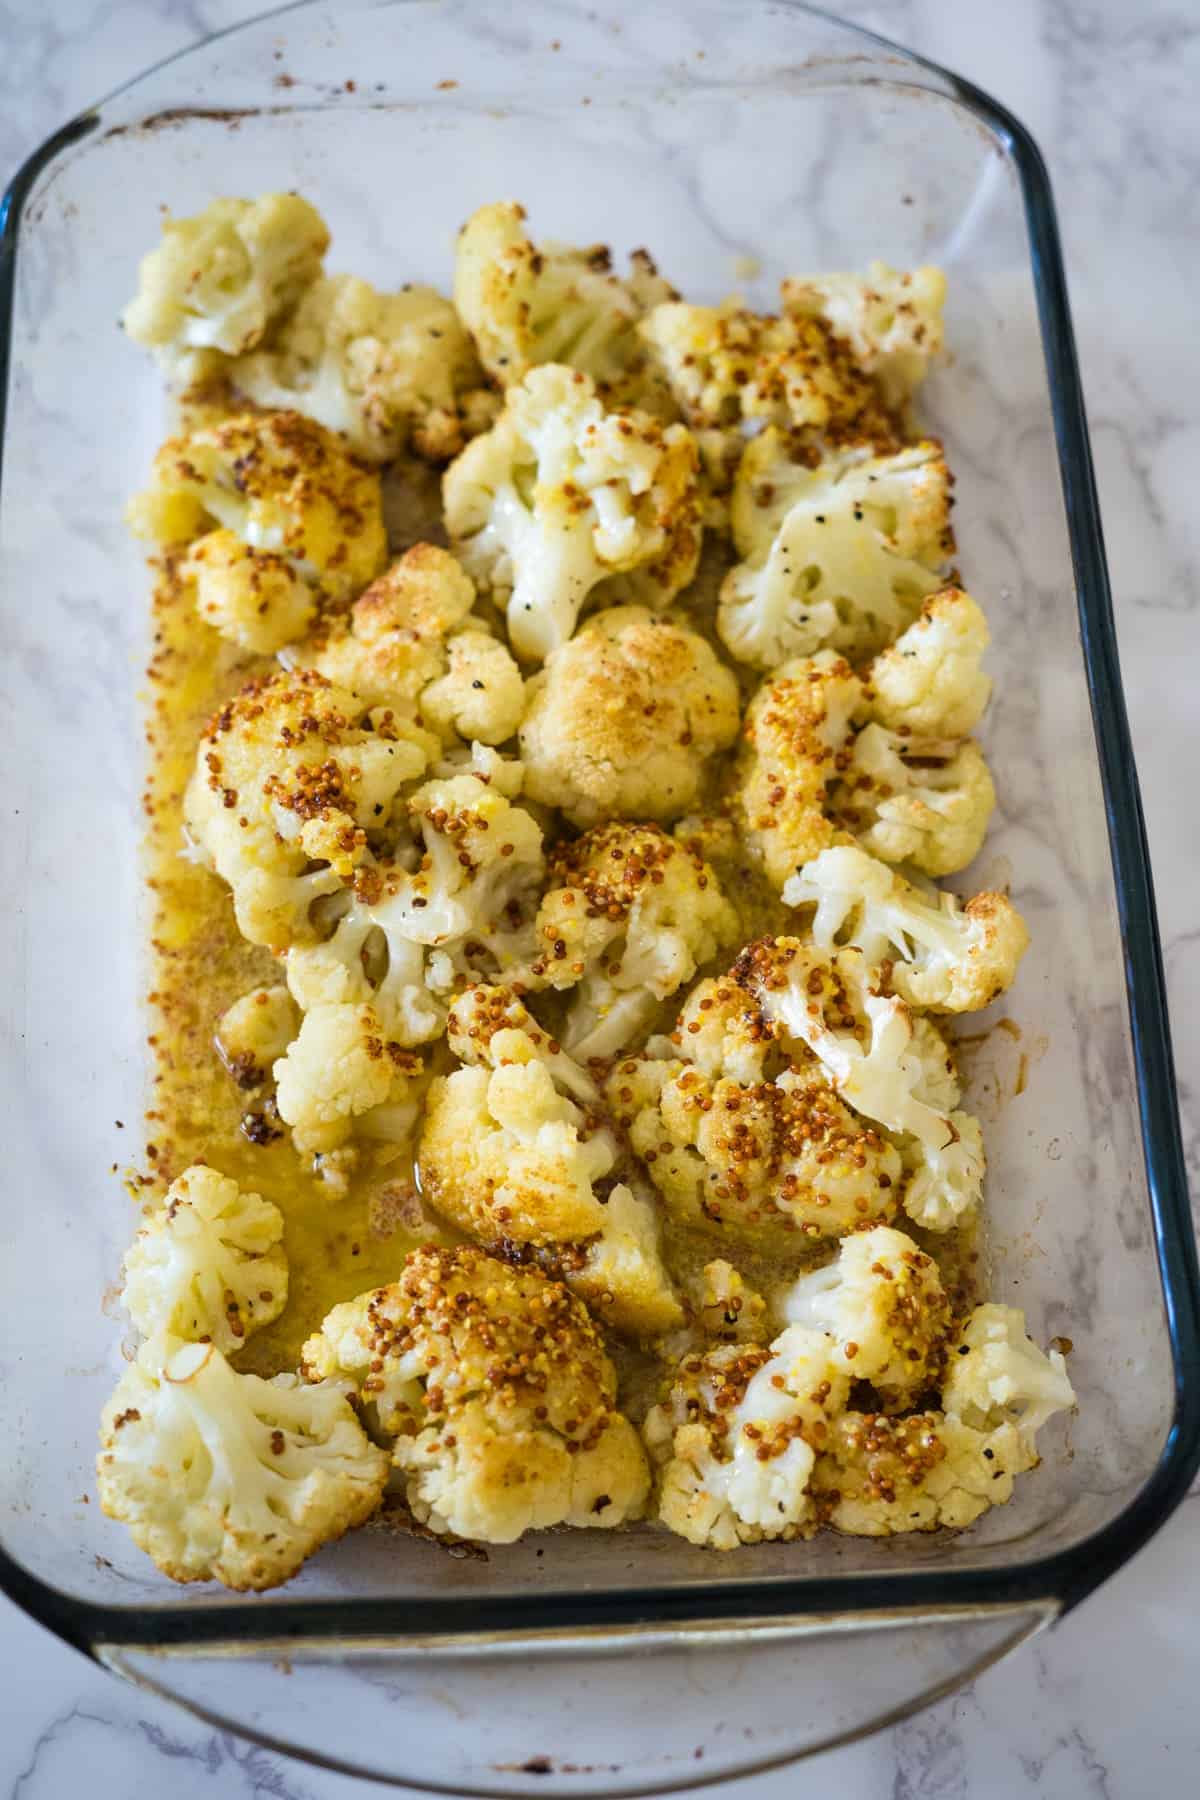 Keto roasted cauliflower with spices in a glass baking dish on a marble counter.